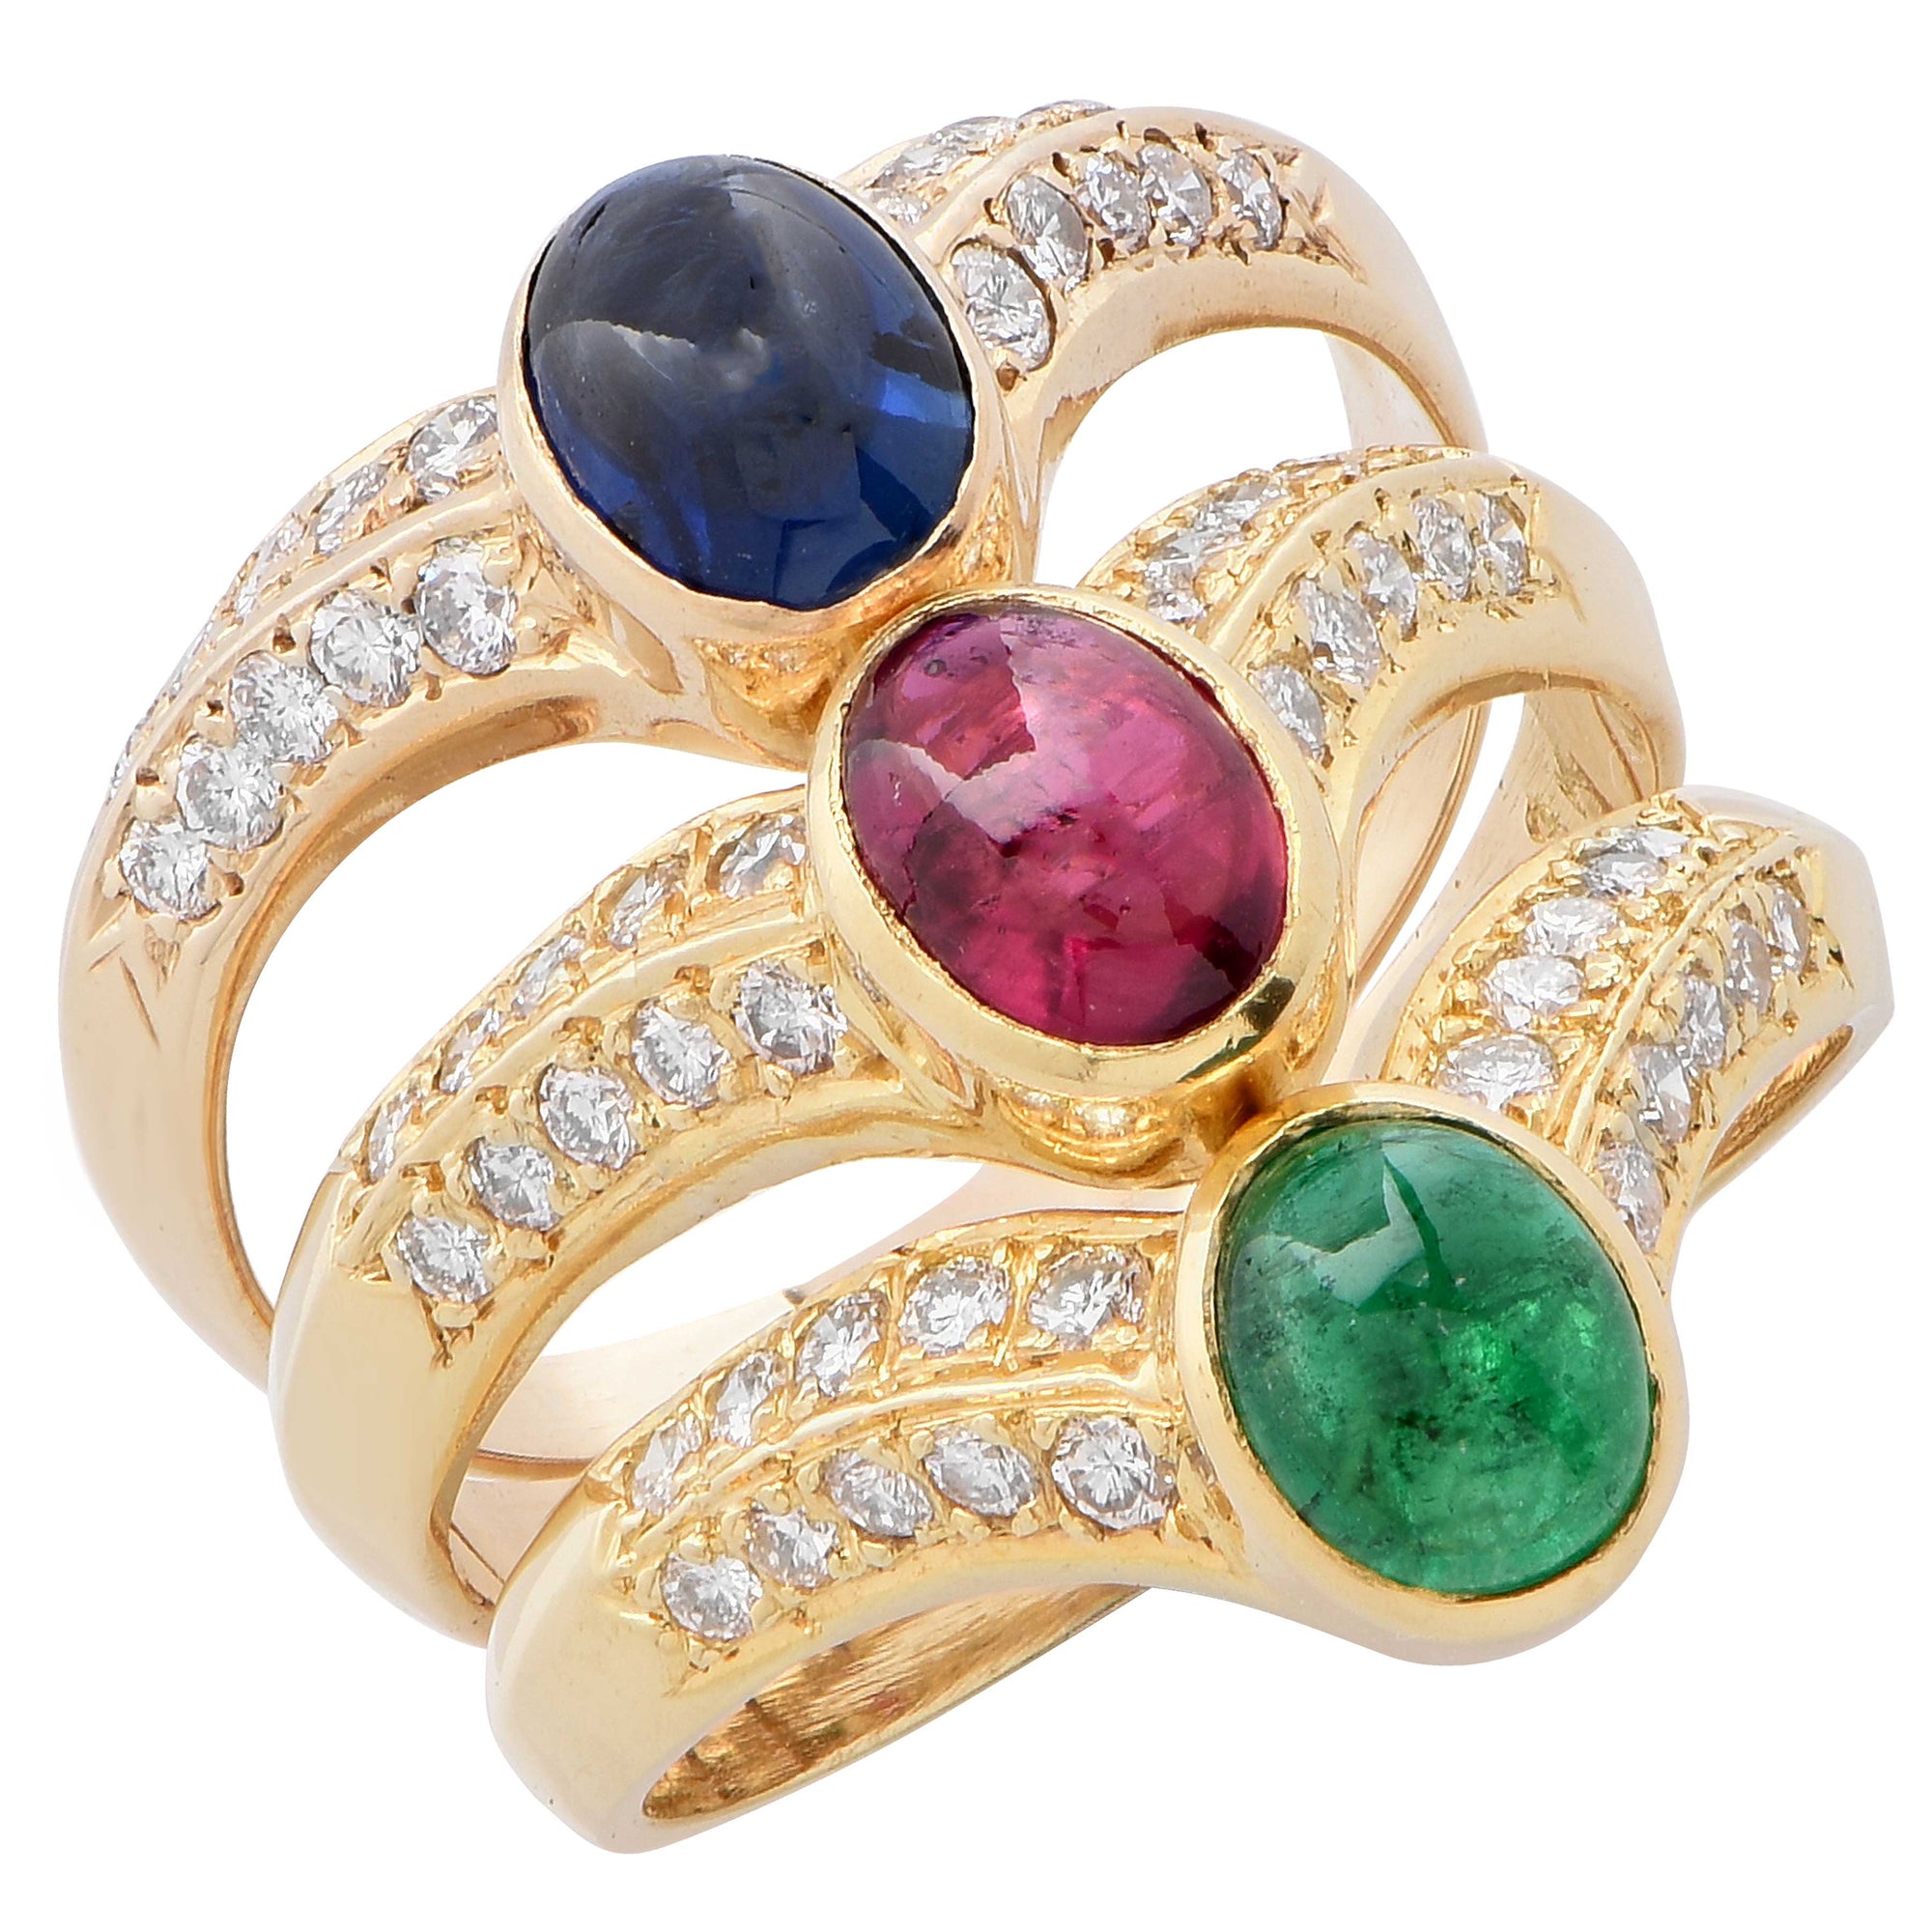 Emerald and ruby ring | 祖母綠配紅寶石戒指 | Magnificent Jewels and Noble Jewels |  2022 | Sotheby's